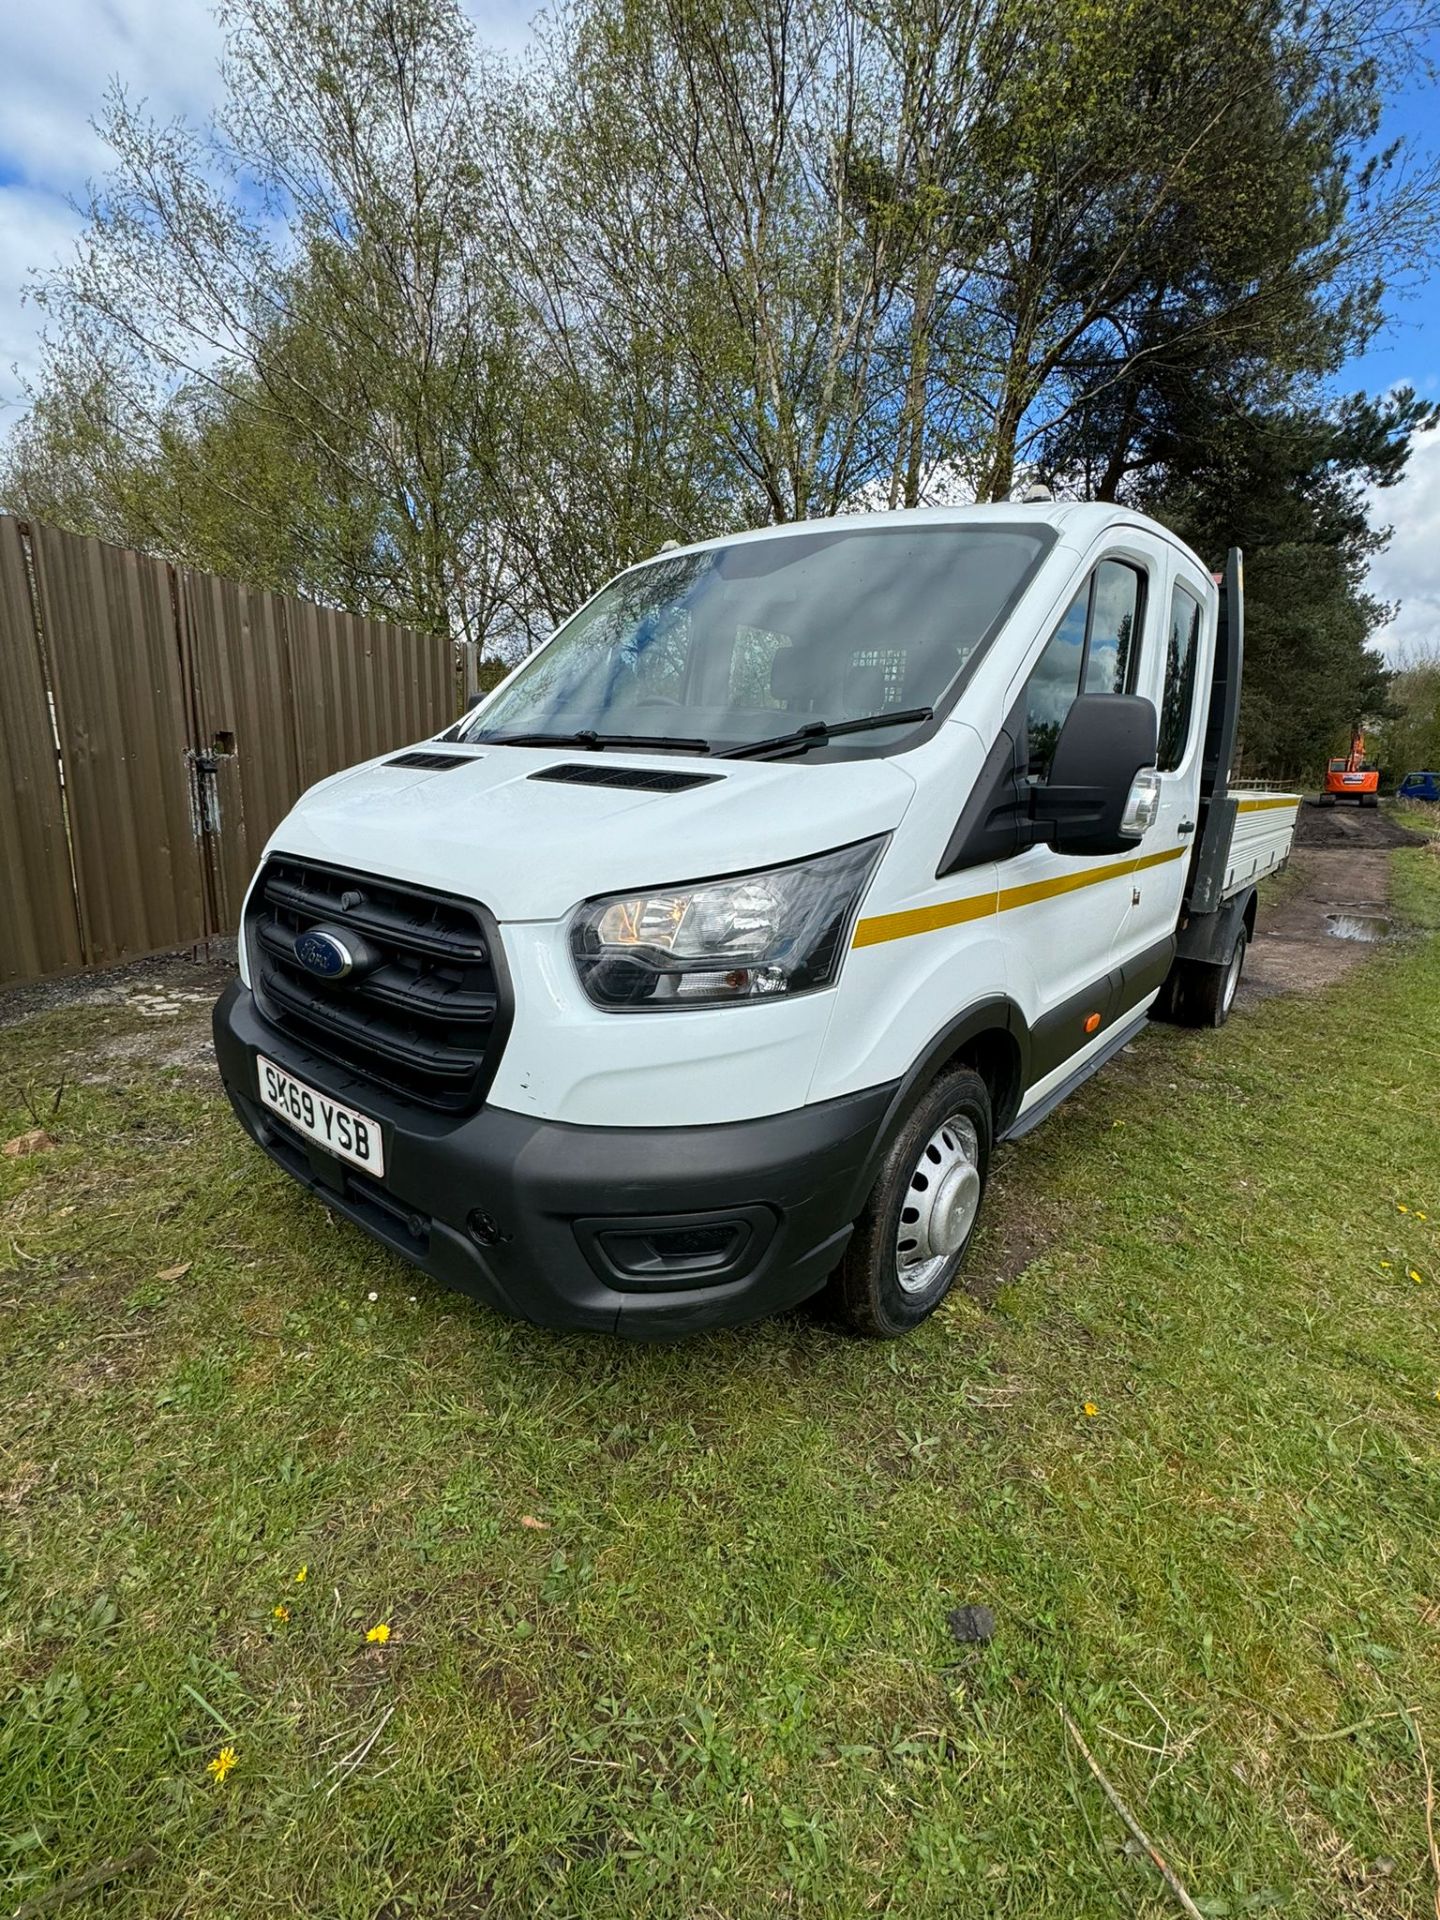 >>>SPECIAL CLEARANCE<<< 96K MILES ONLY** FORD TRANSIT TIPPER 2020 DOUBLE CAB TRUCK - Bild 3 aus 15